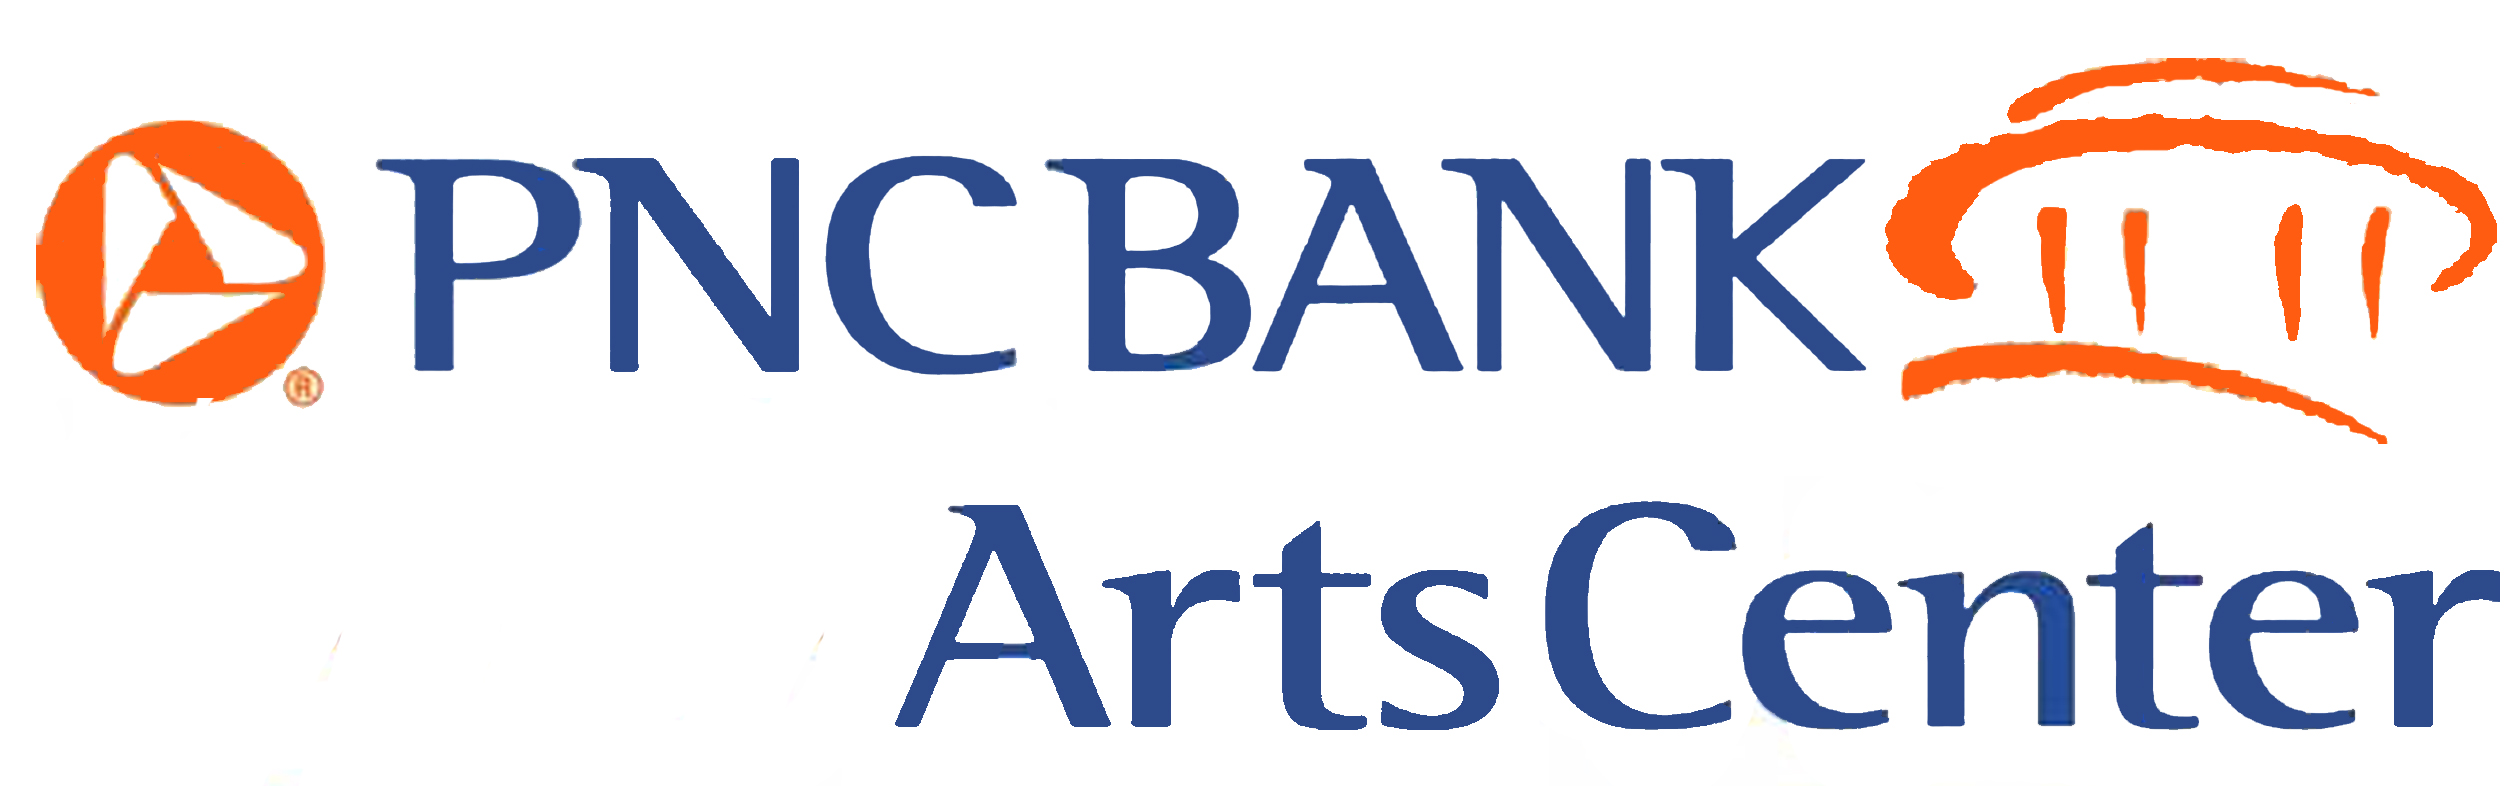 Criminal Lawyers for PNC Bank Art Center Charges